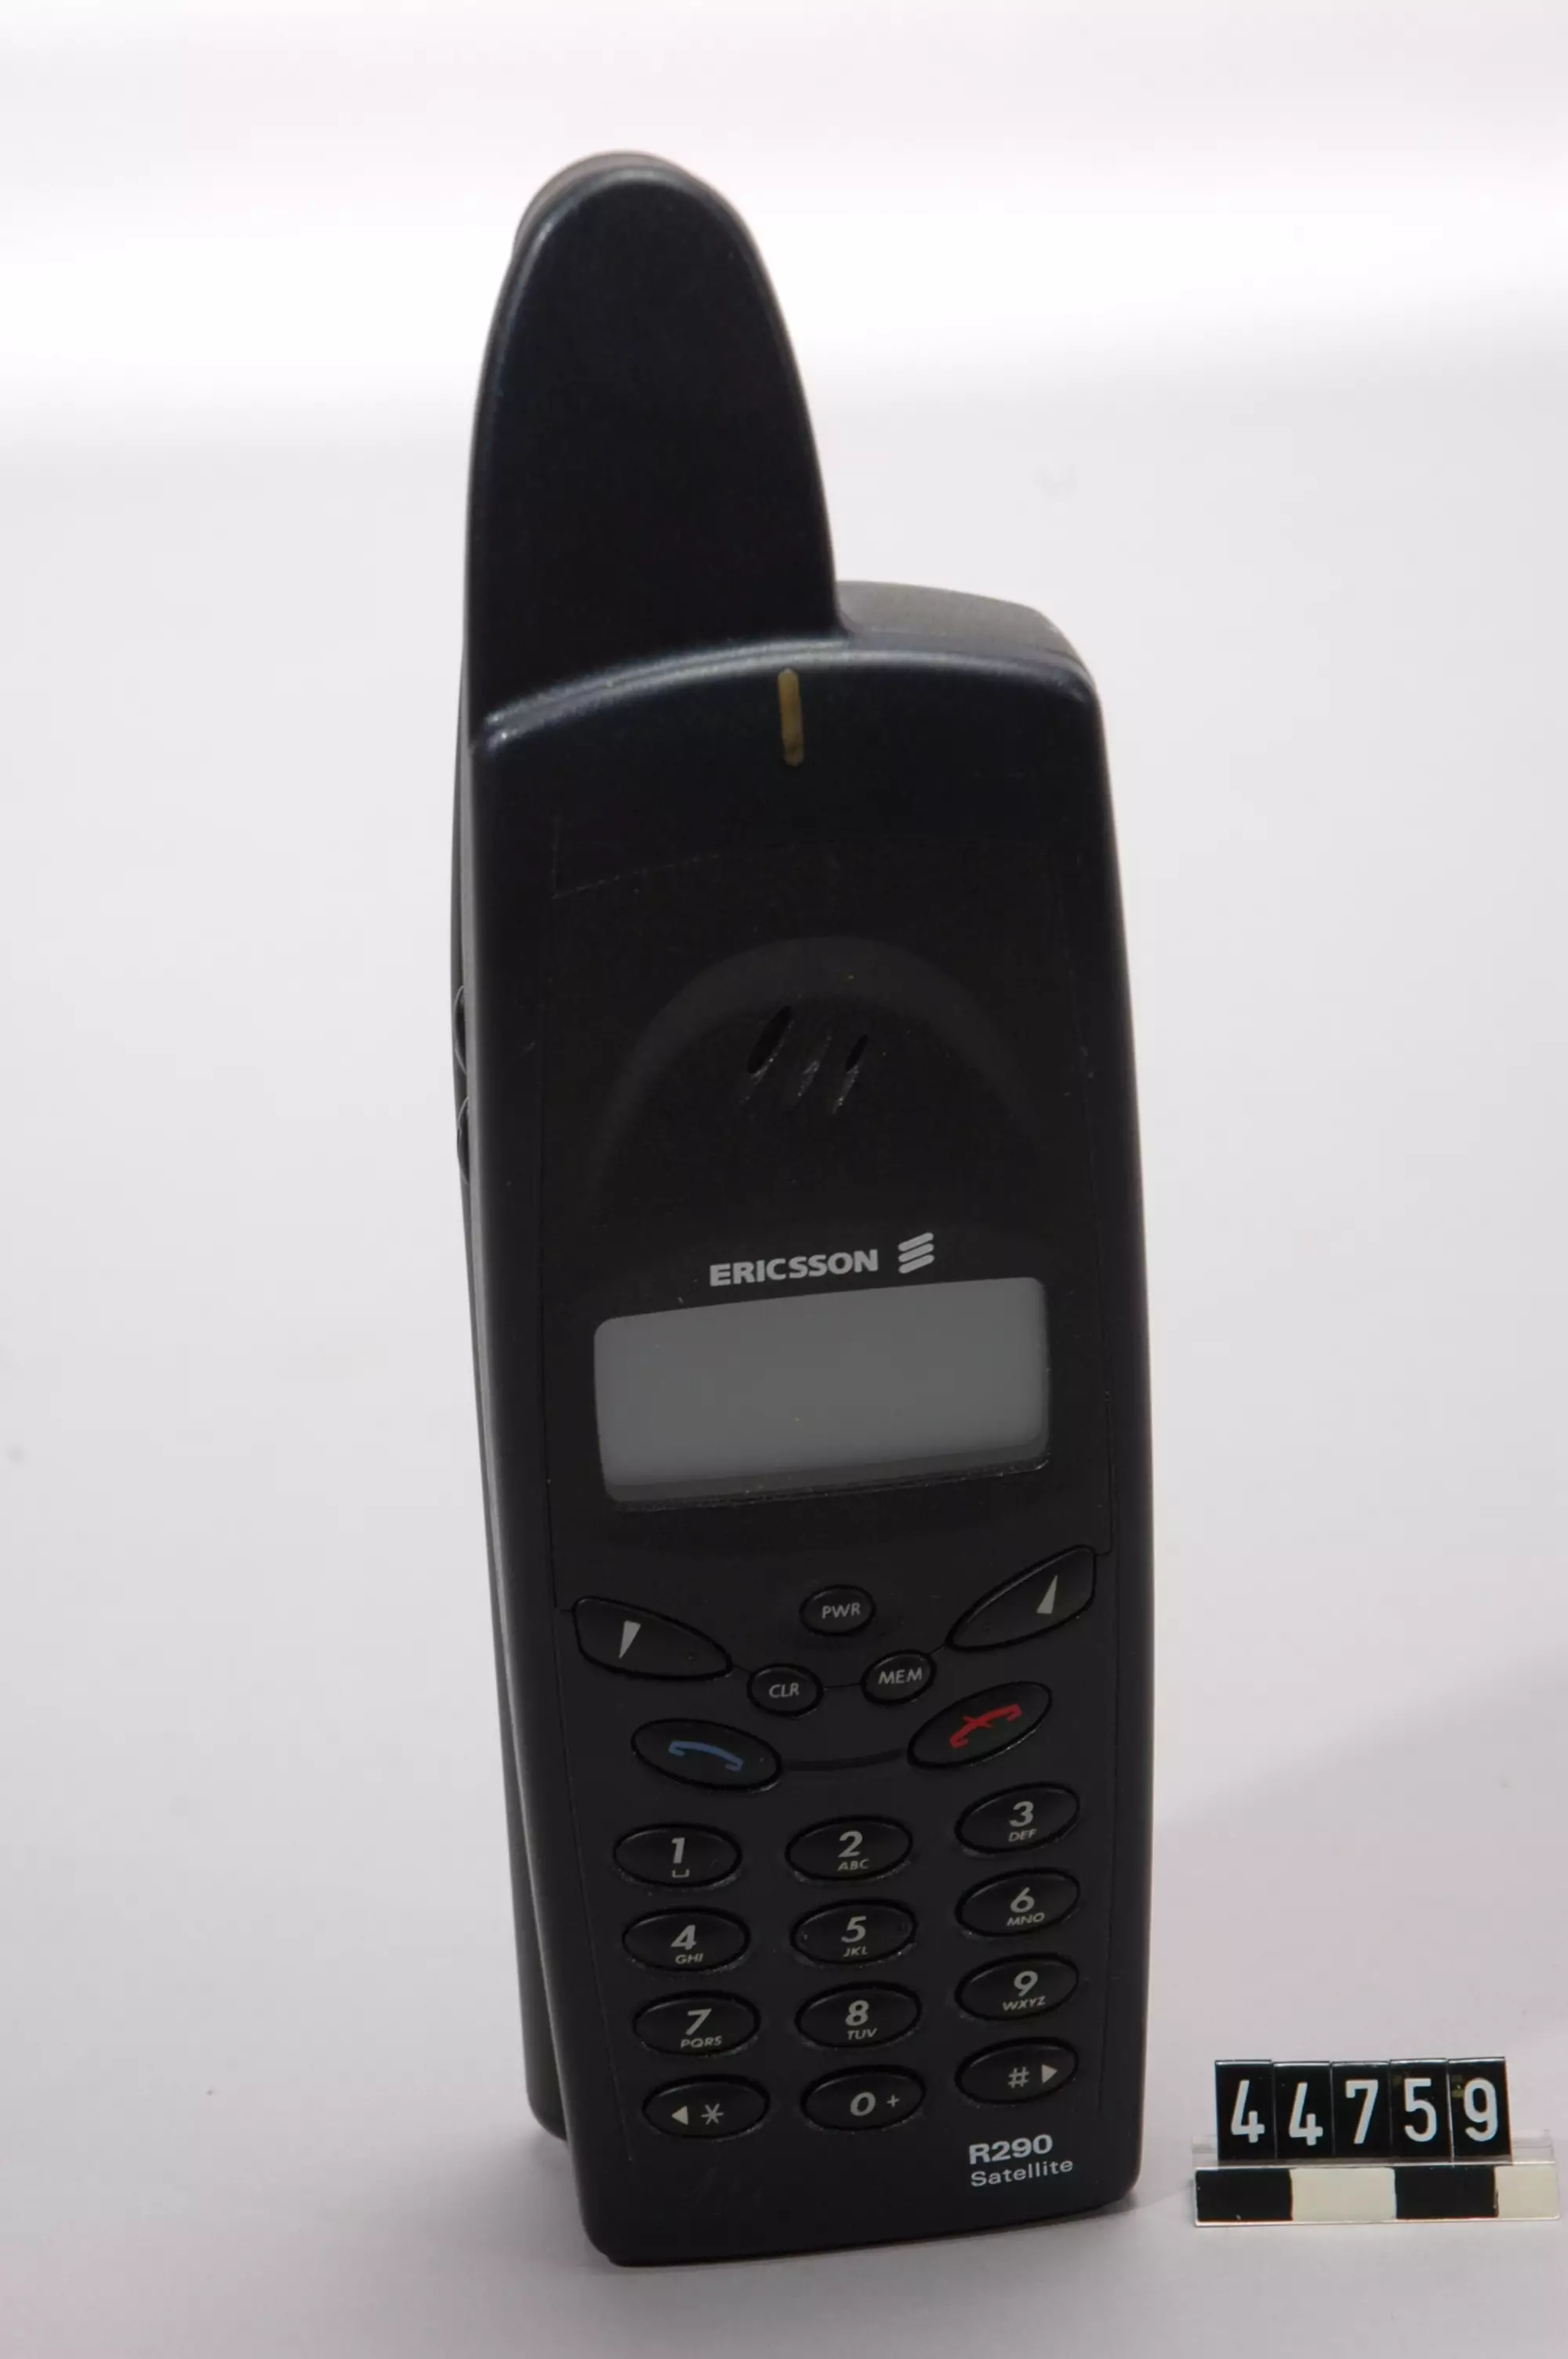 The Ericsson R290 Satellite Phone, released in 1999, could sell for up to £1,000.